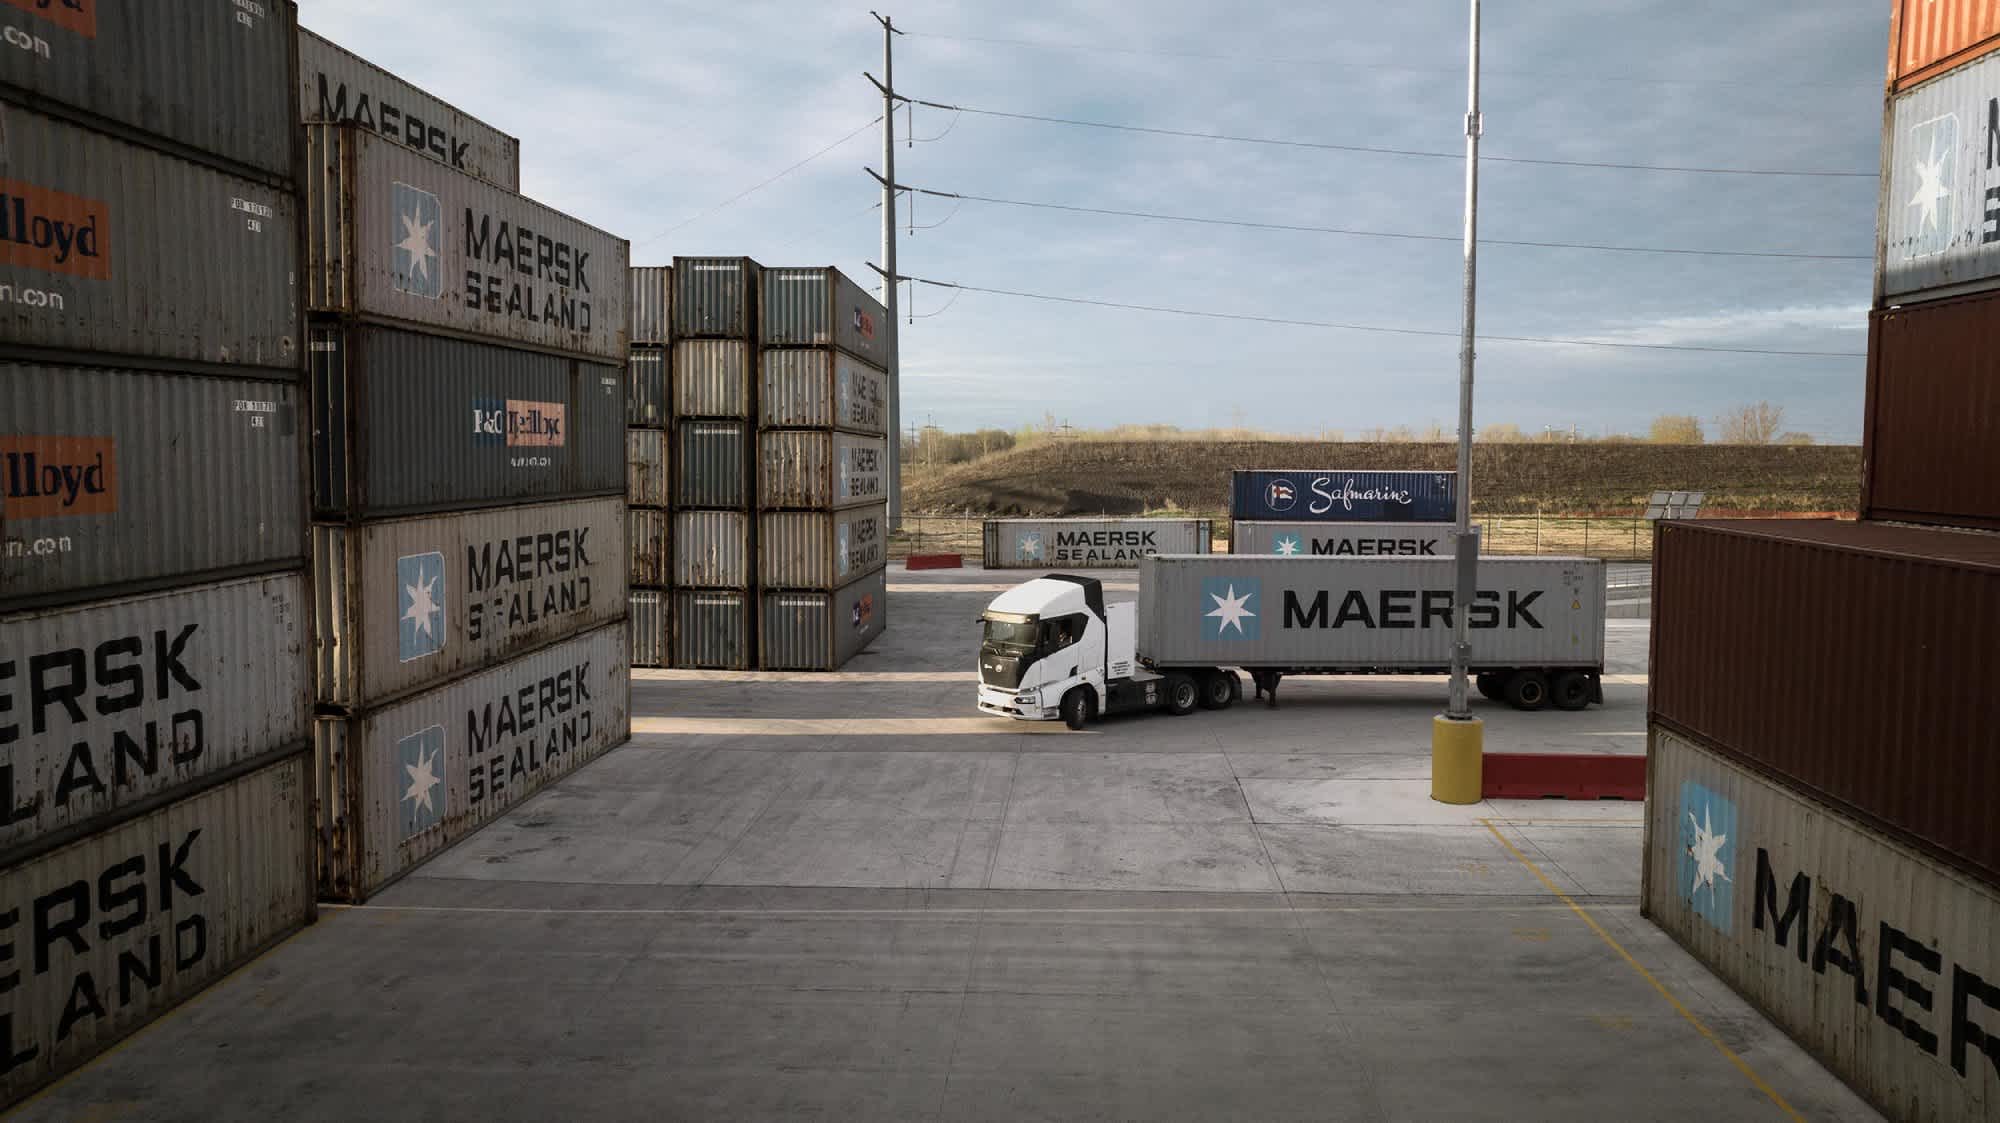 A view from overhead of a Maersk truck in a truck lot among pallates.